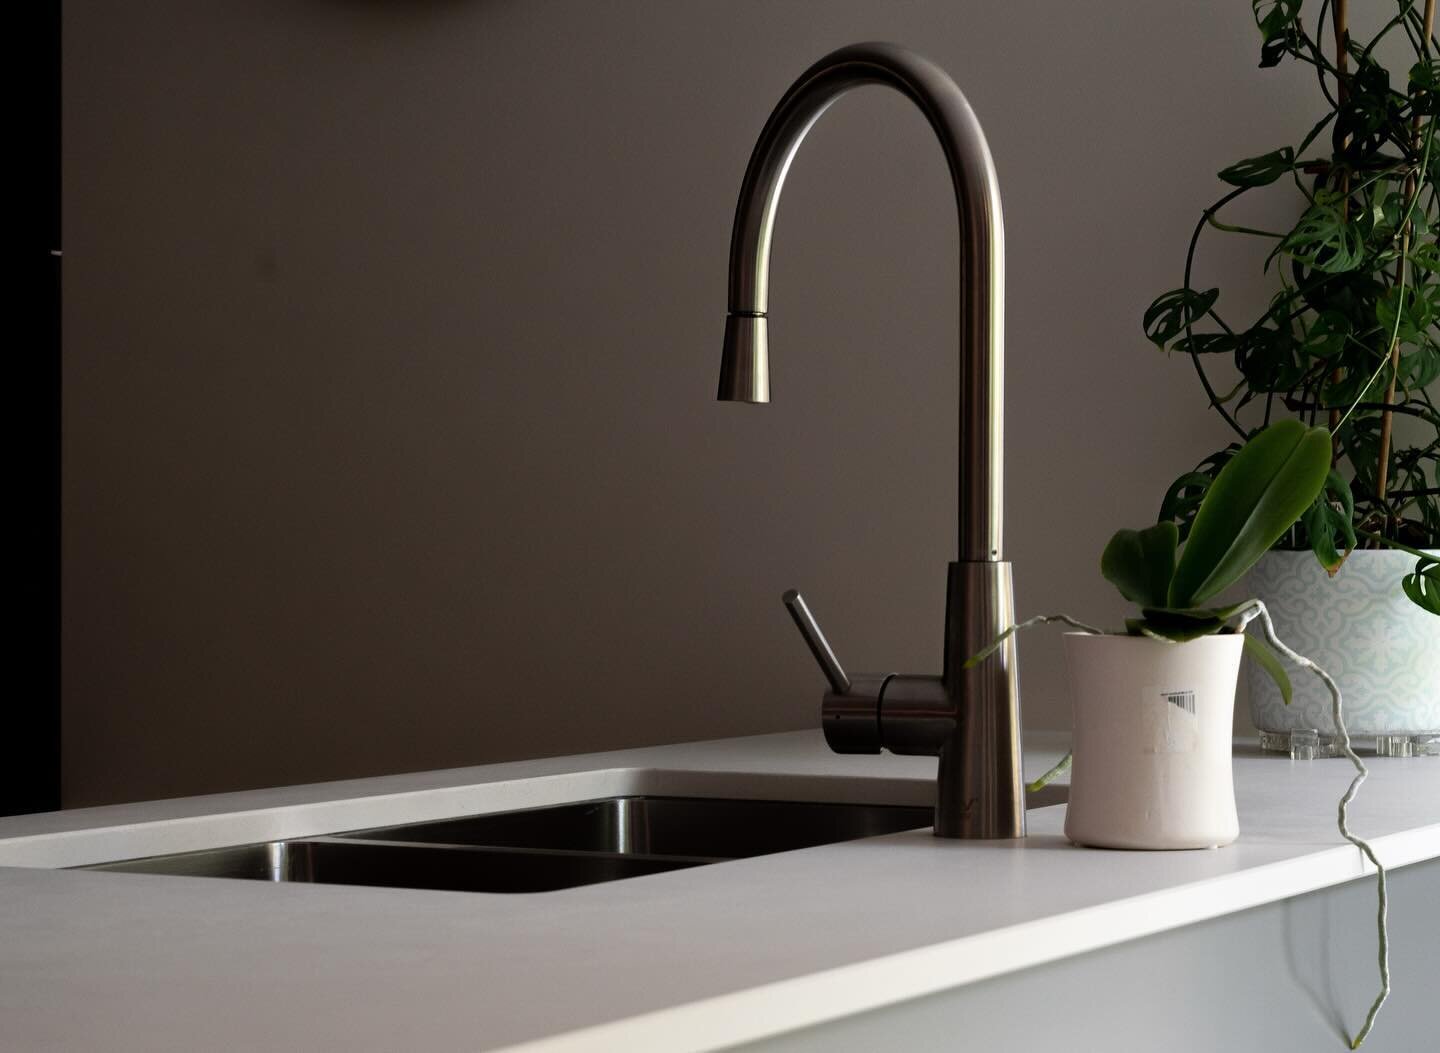 Elevate Your Kitchen with Subtle Details

Take your kitchen to the next level of sophistication and style by embracing the power of subtle details. From elegant cabinet handles to sleek tapware and timeless tiled splashbacks, these small touches can 